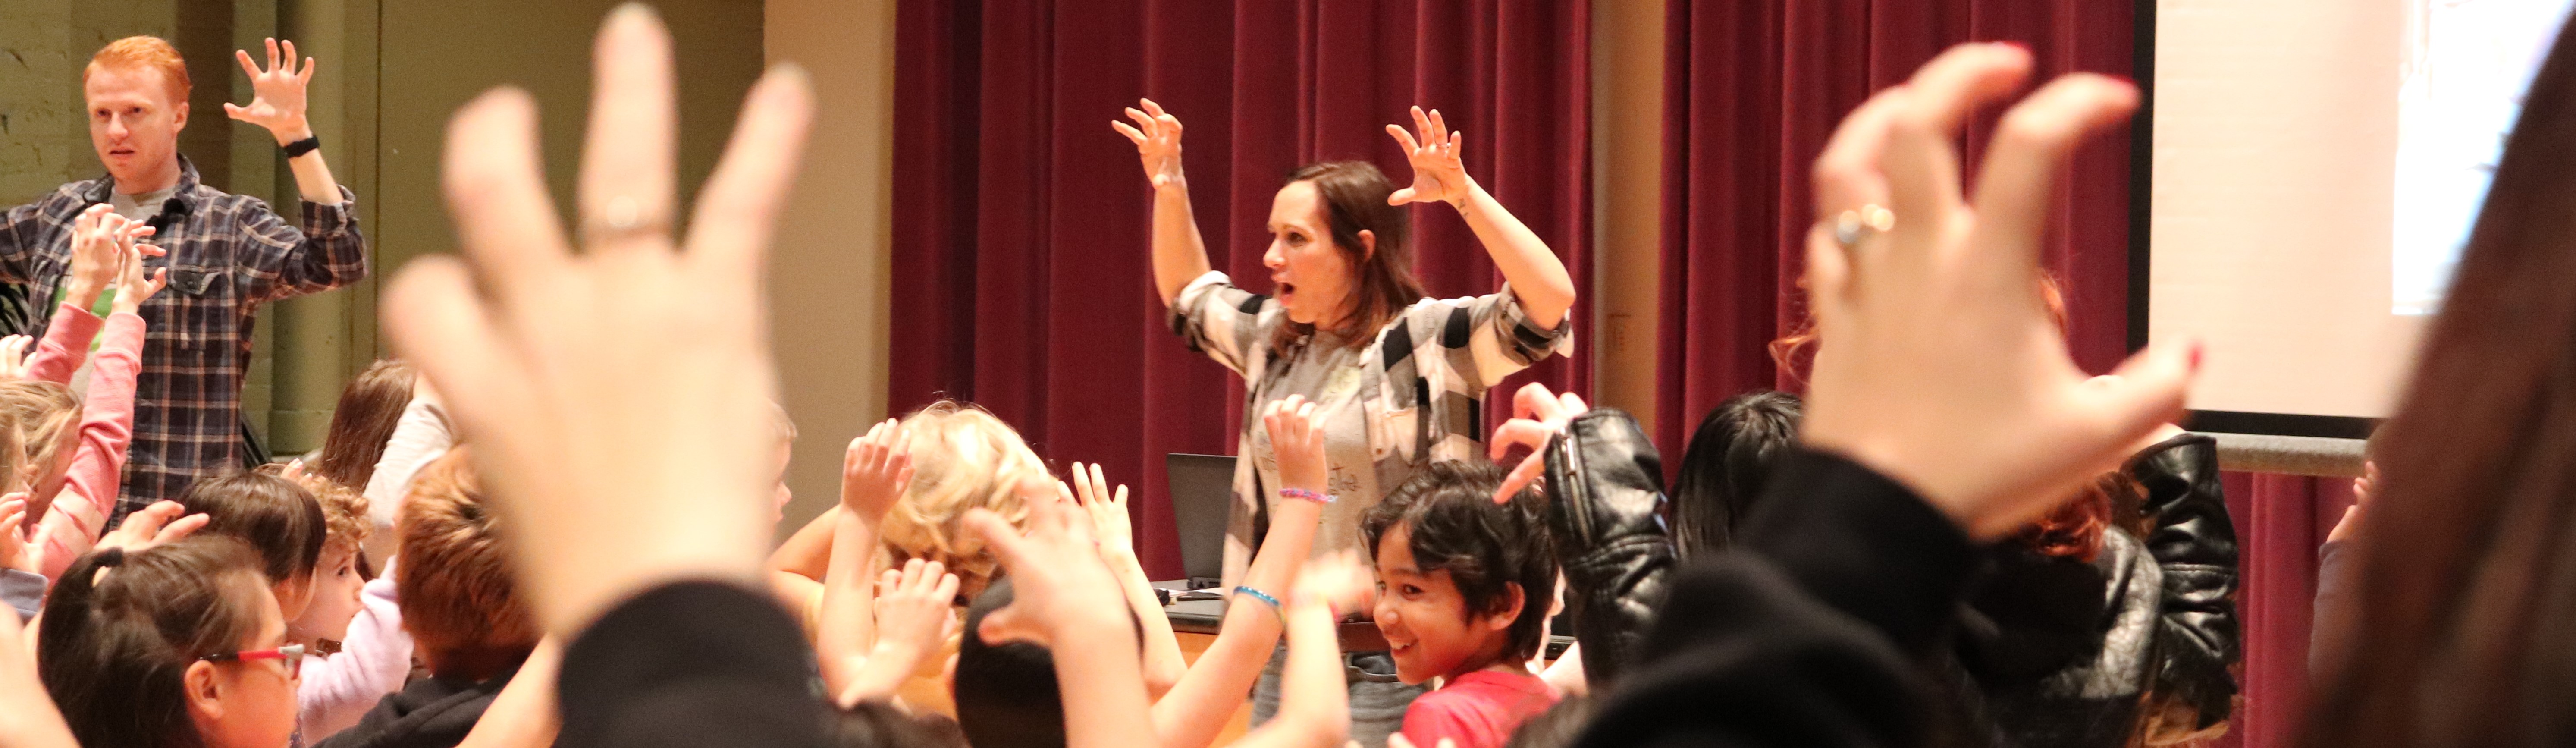 Image from First Stage's Theater Education programming